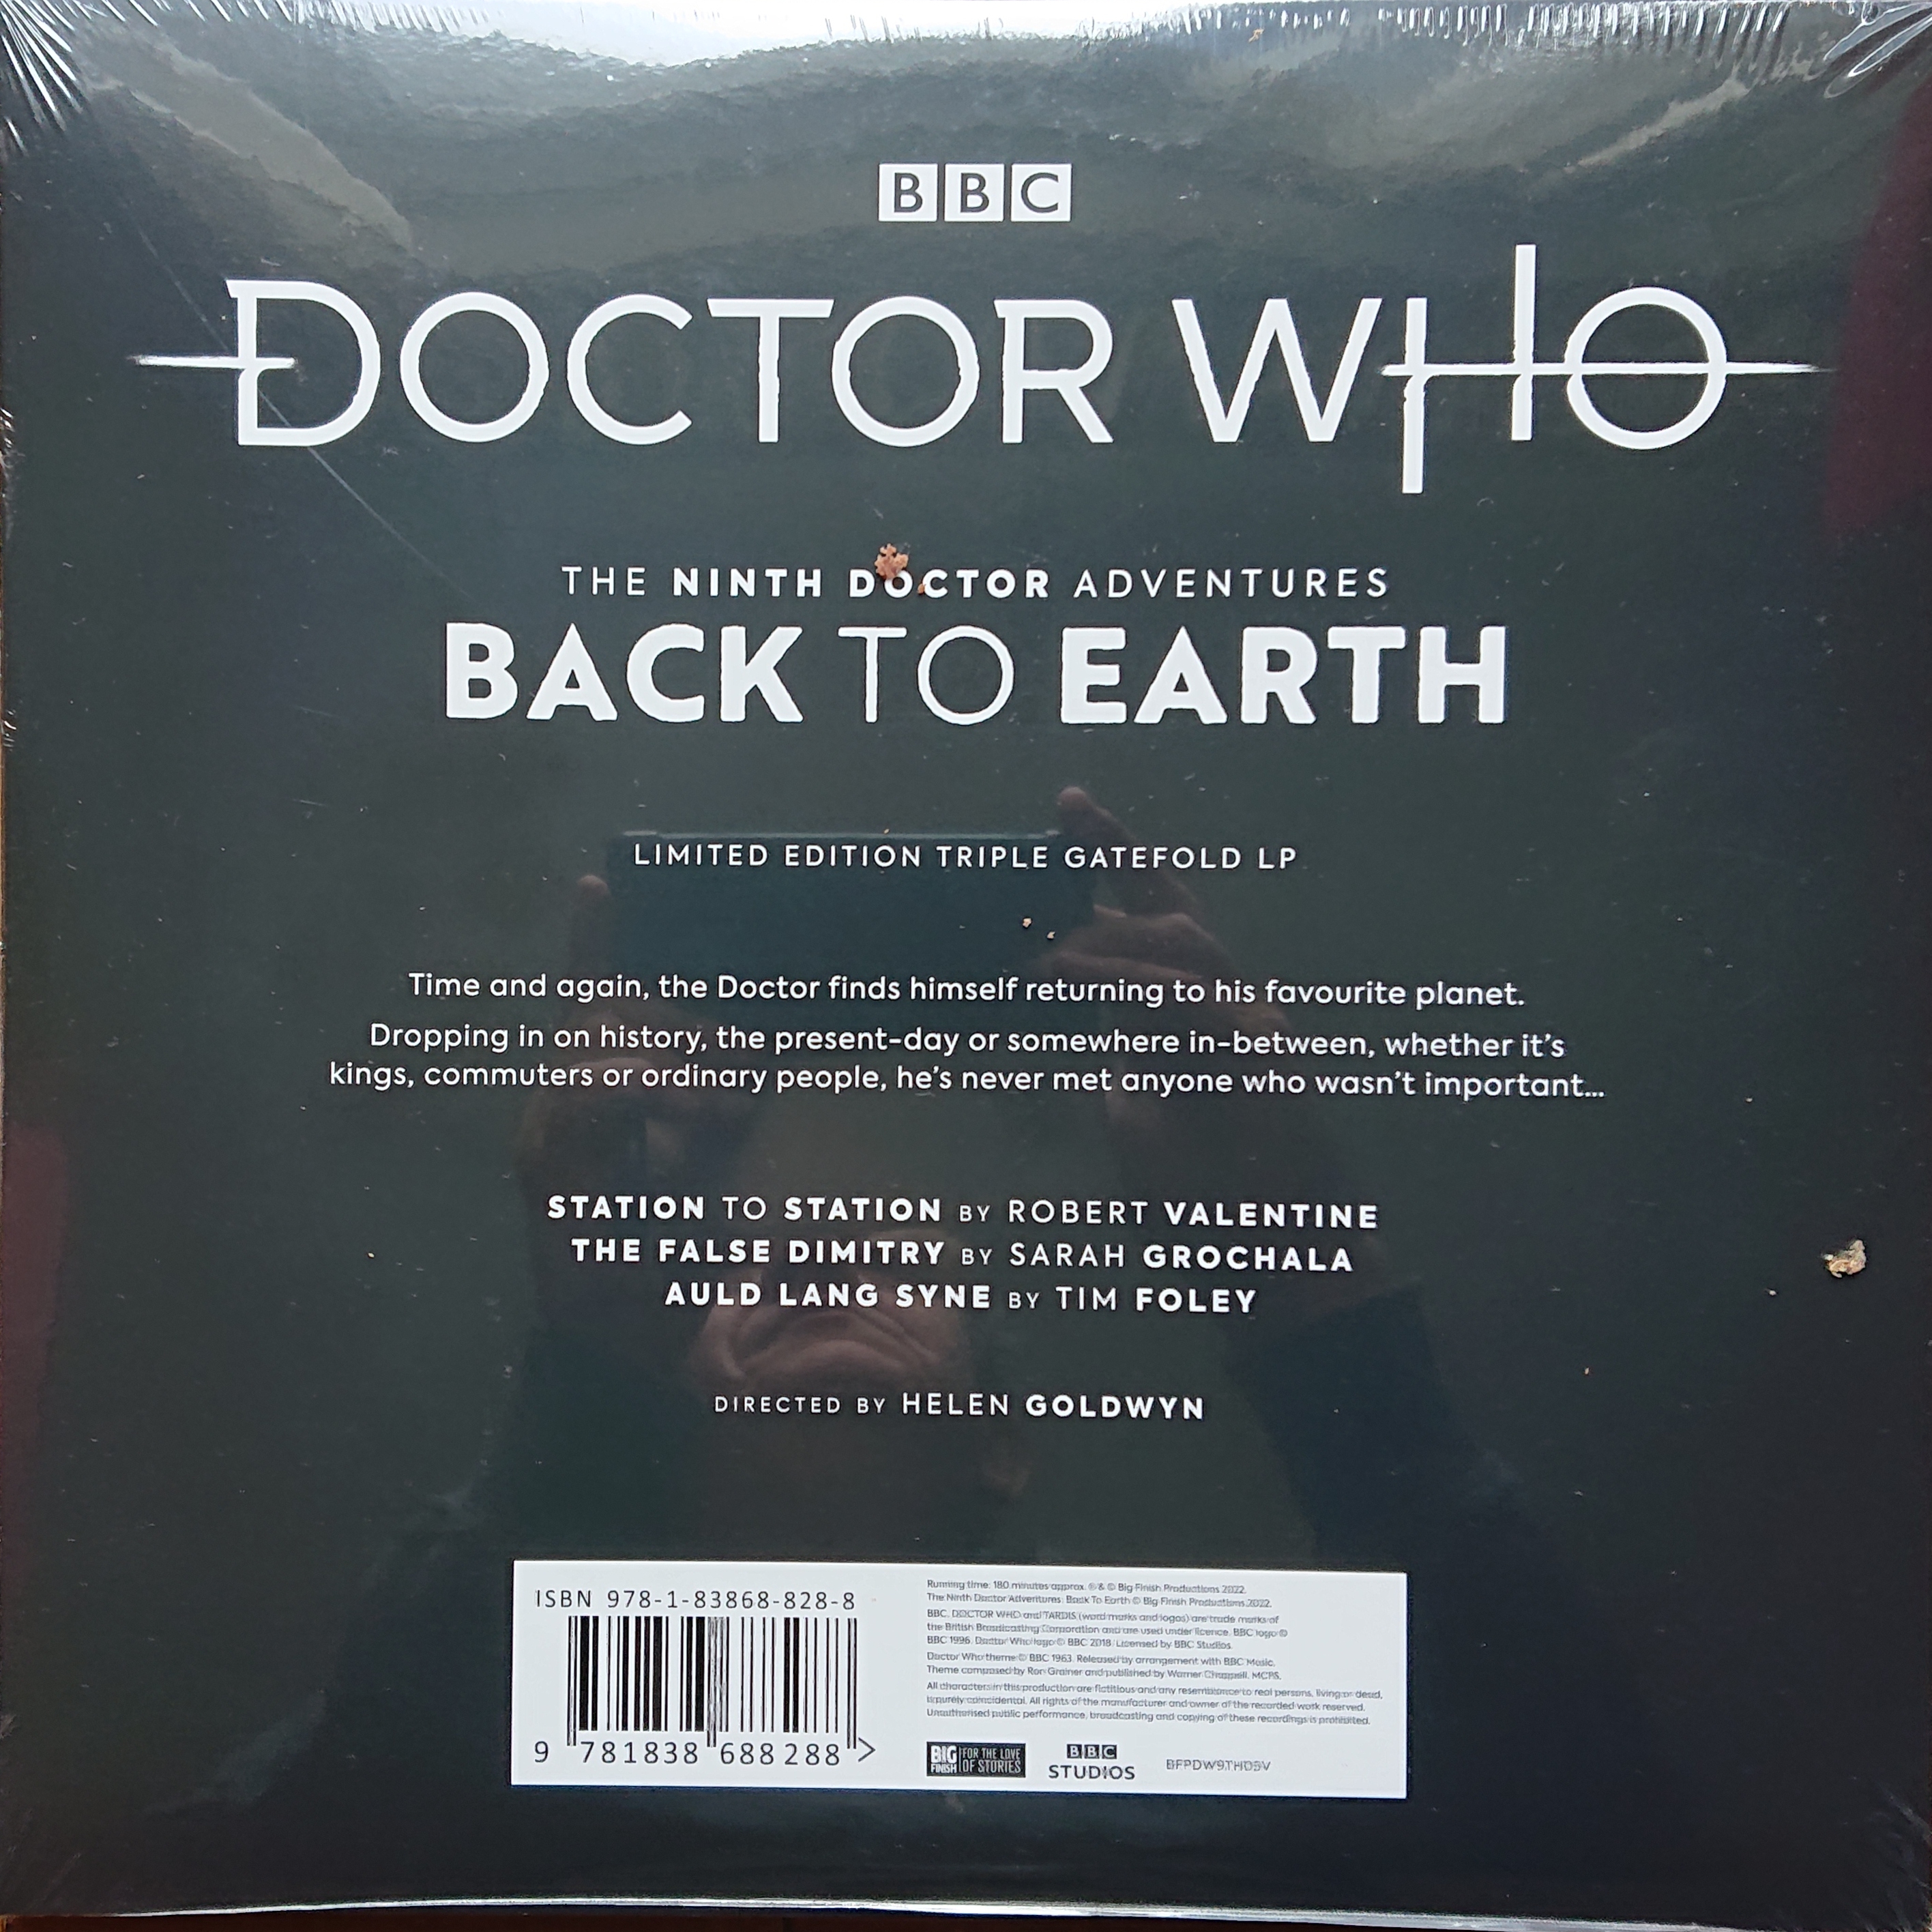 Picture of BFPDW9TH05V Doctor Who - The Ninth Doctor Adventures 2.1: Back to Earth by artist Robert Valentine / Sarah Grochala / Tim Foley from the BBC records and Tapes library